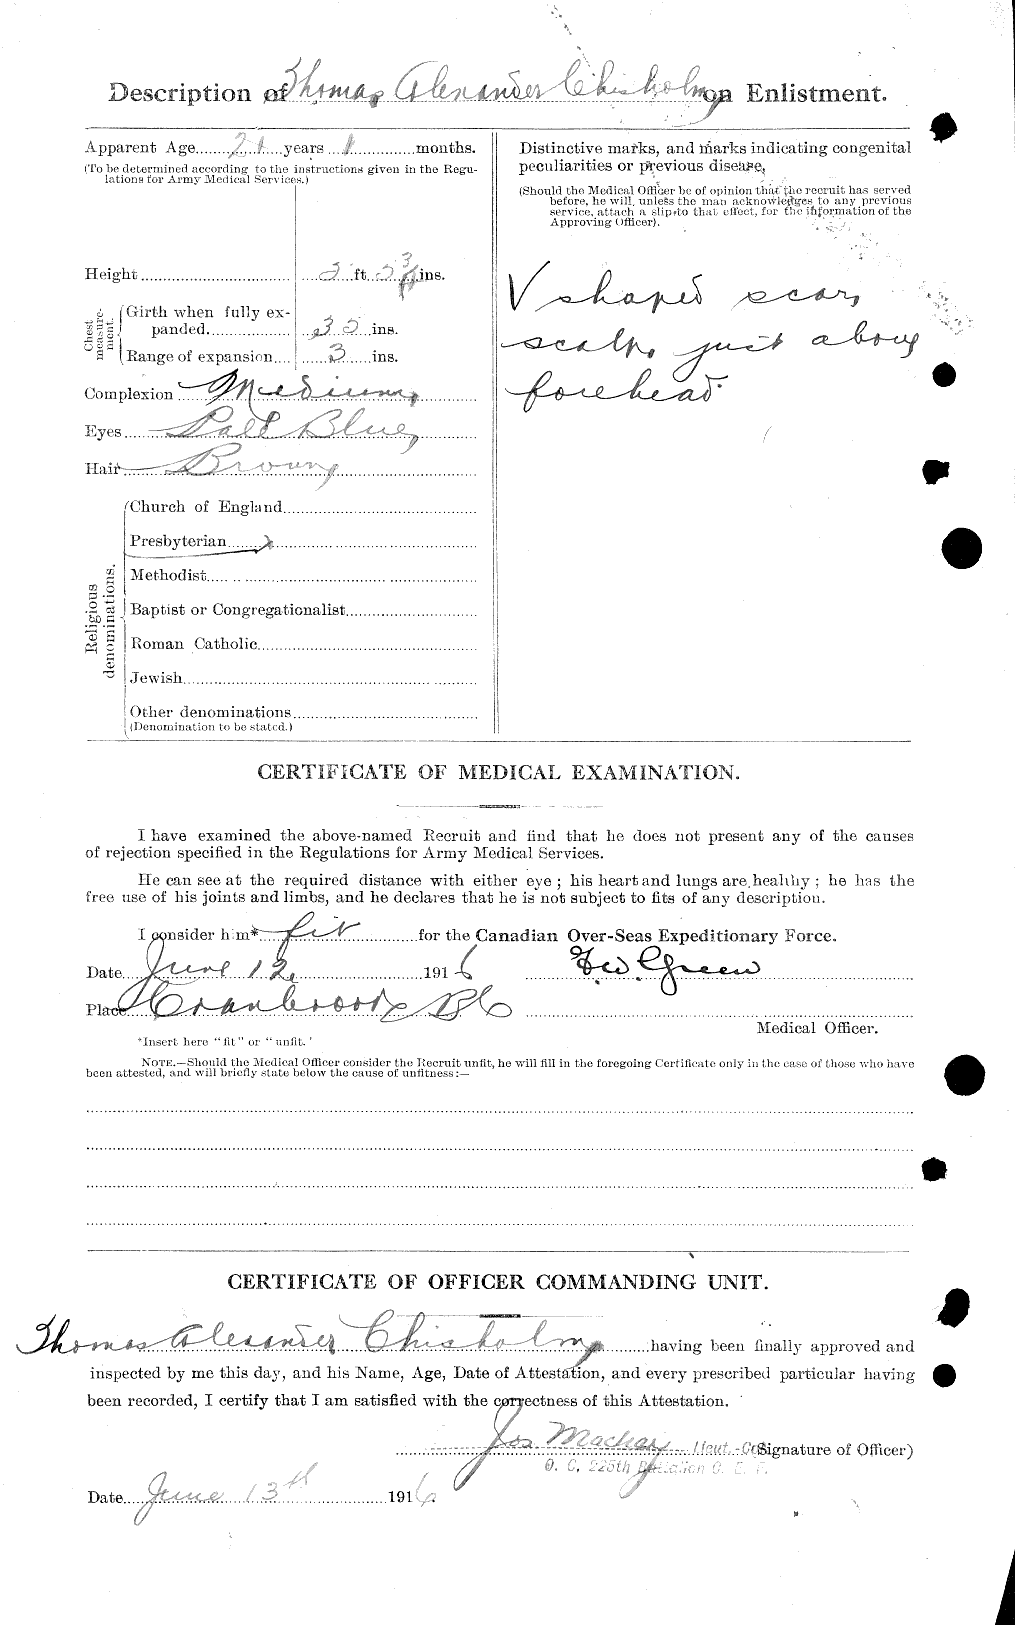 Personnel Records of the First World War - CEF 018375b